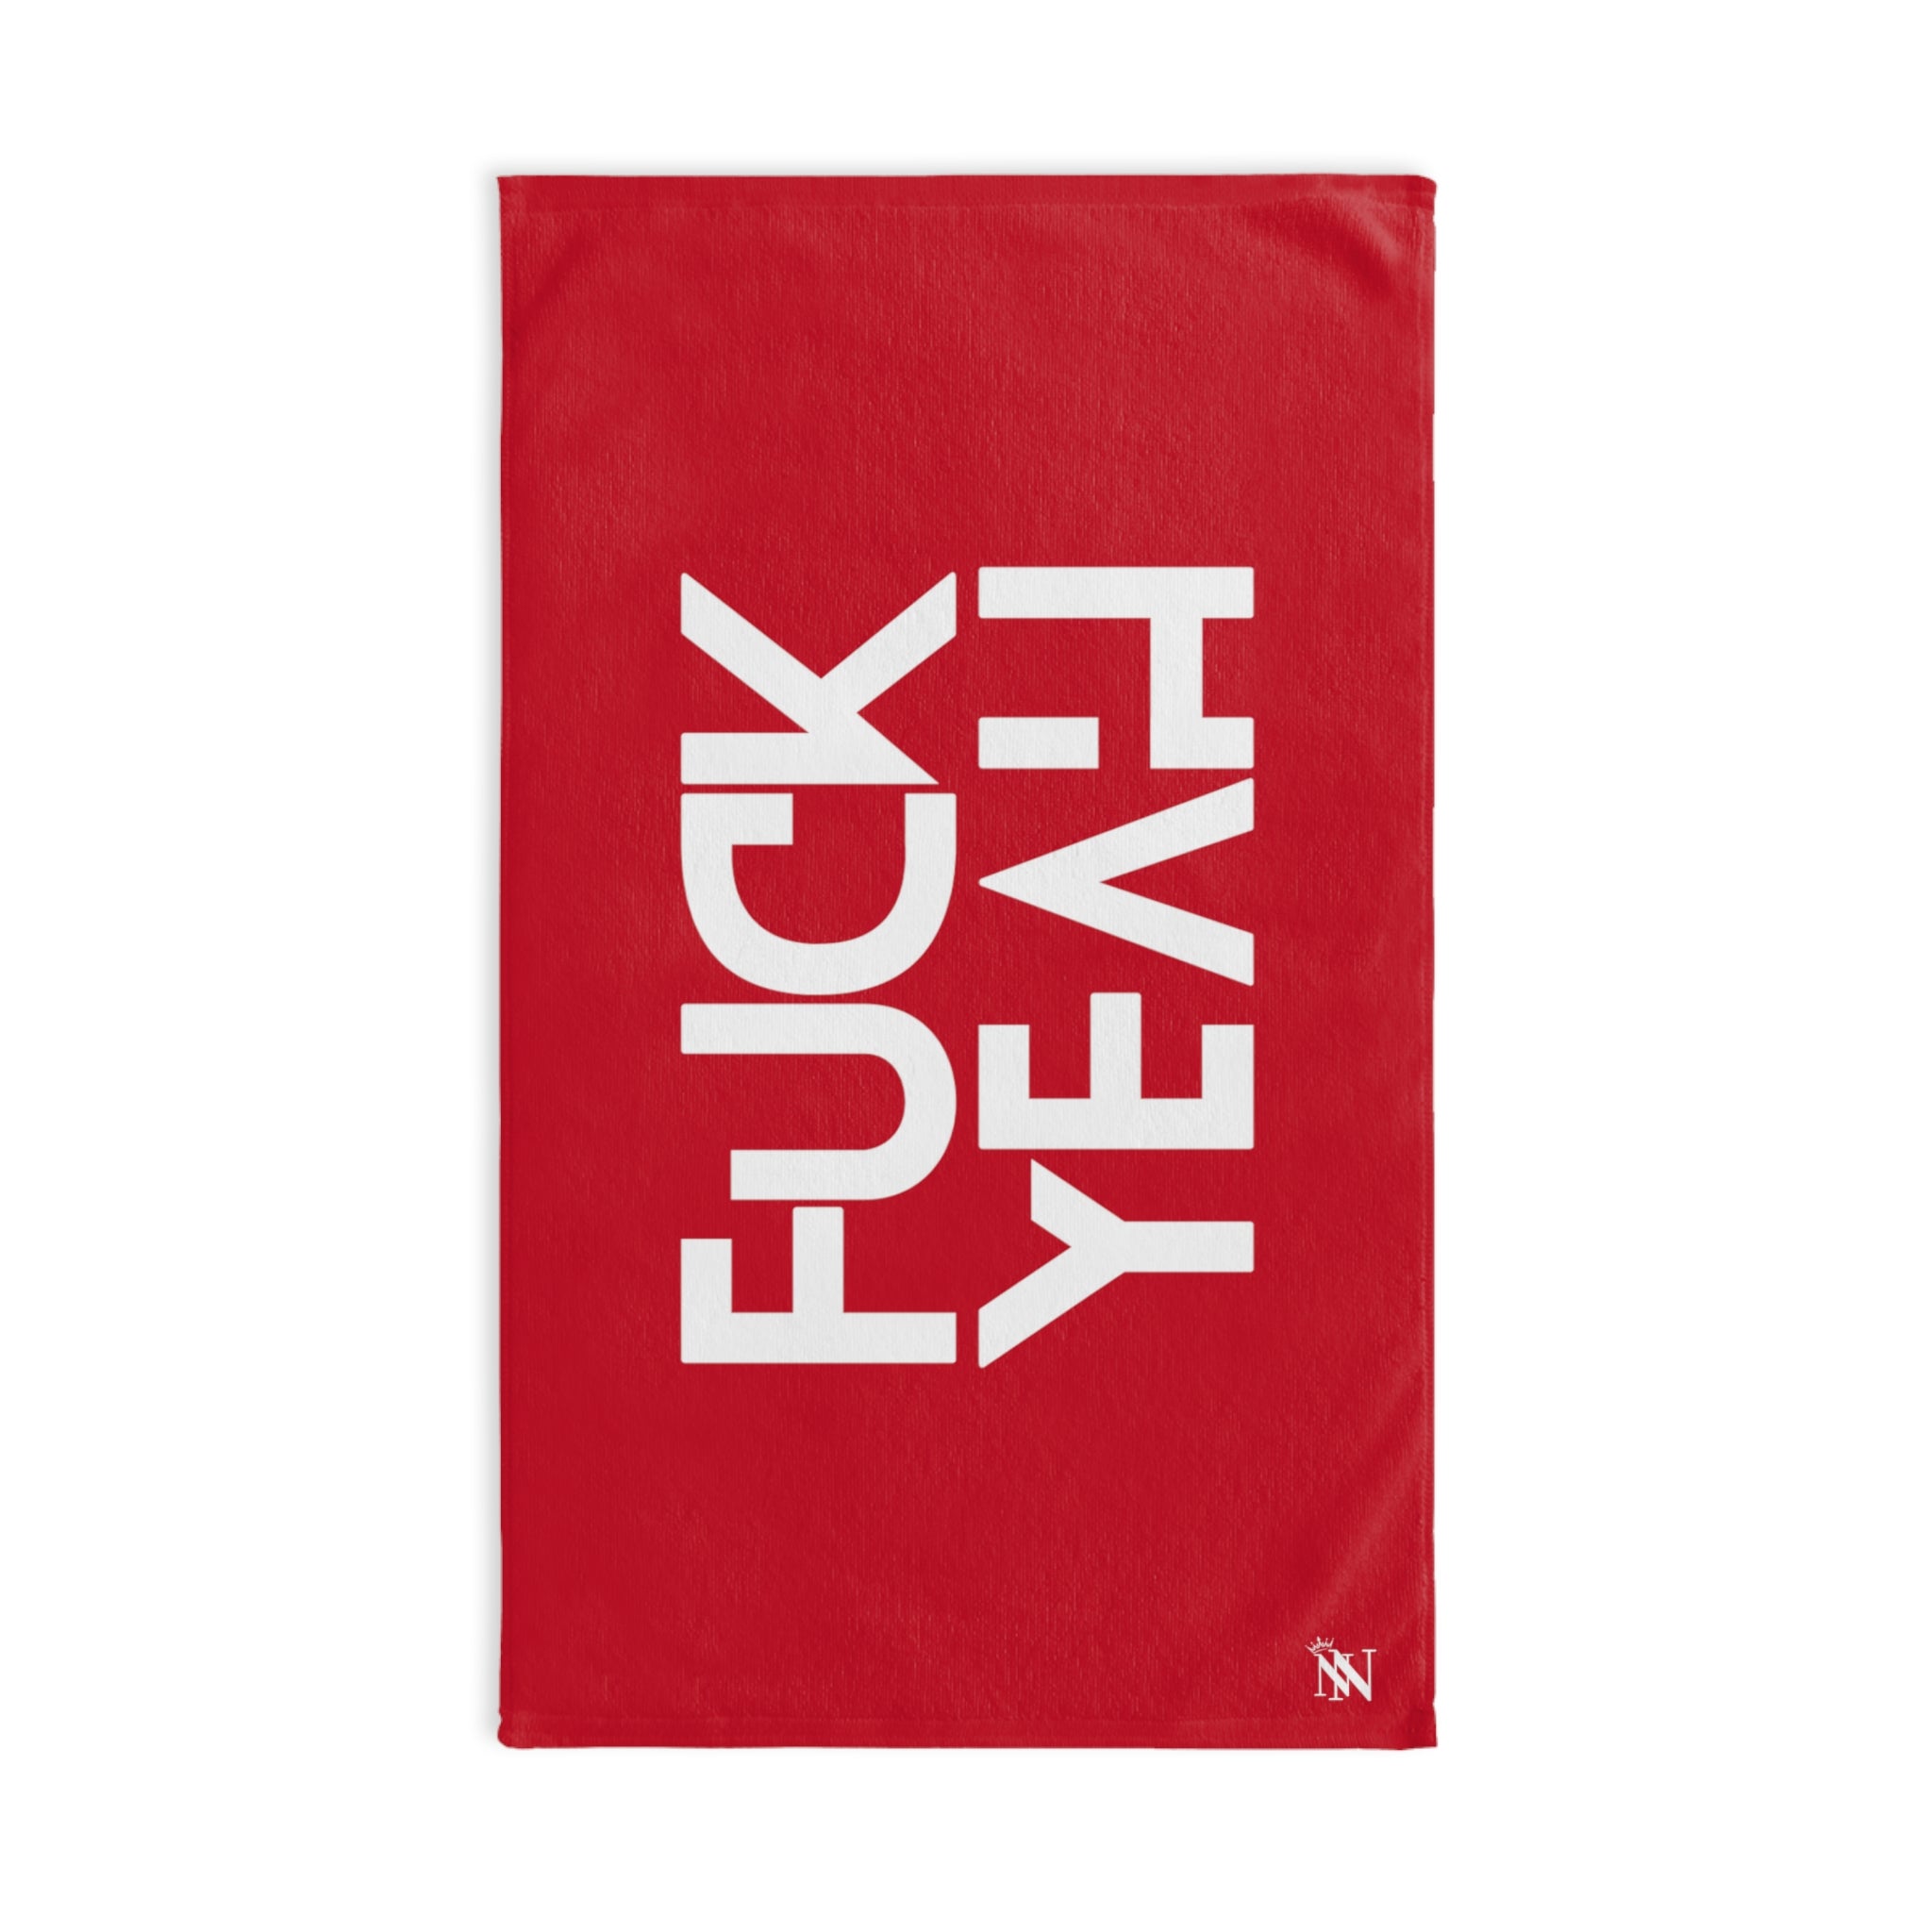 F*ck  White Yes YeahRed | Sexy Gifts for Boyfriend, Funny Towel Romantic Gift for Wedding Couple Fiance First Year 2nd Anniversary Valentines, Party Gag Gifts, Joke Humor Cloth for Husband Men BF NECTAR NAPKINS